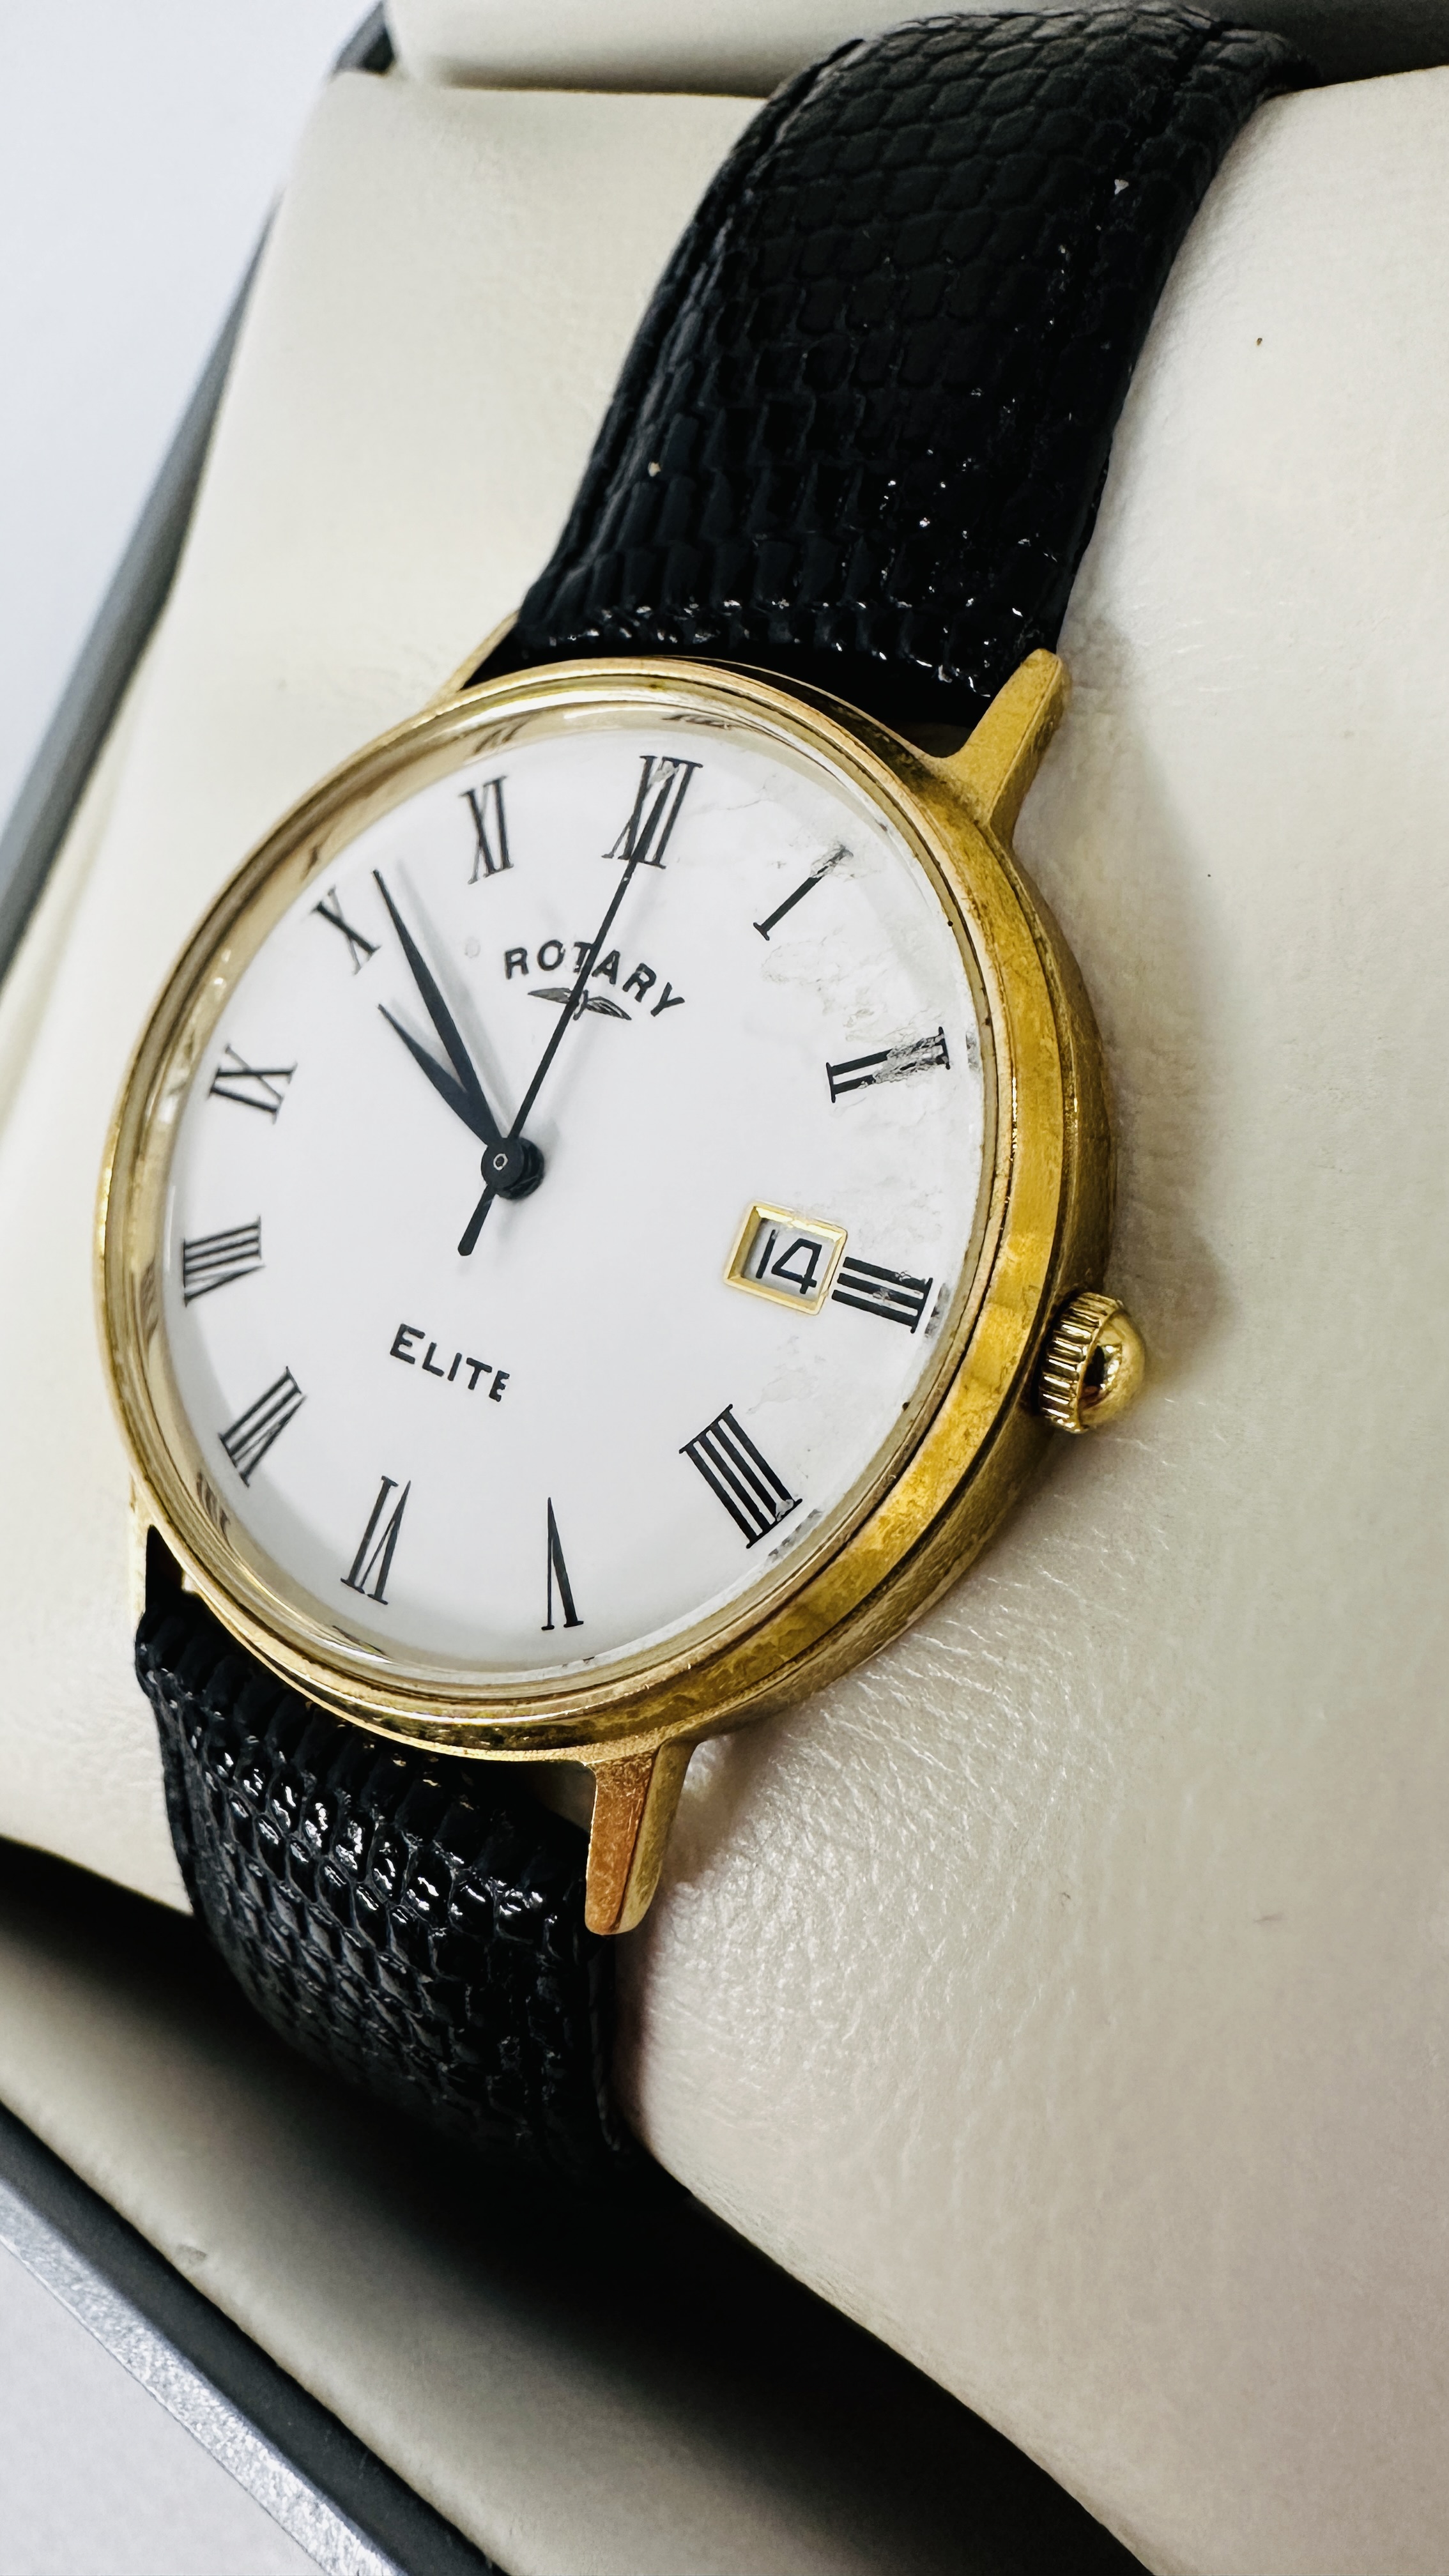 A GENT'S ROTARY ELITE 9CT GOLD CASED WRIST WATCH ON A BLACK LEATHER STRAP (BOXED). - Image 4 of 7